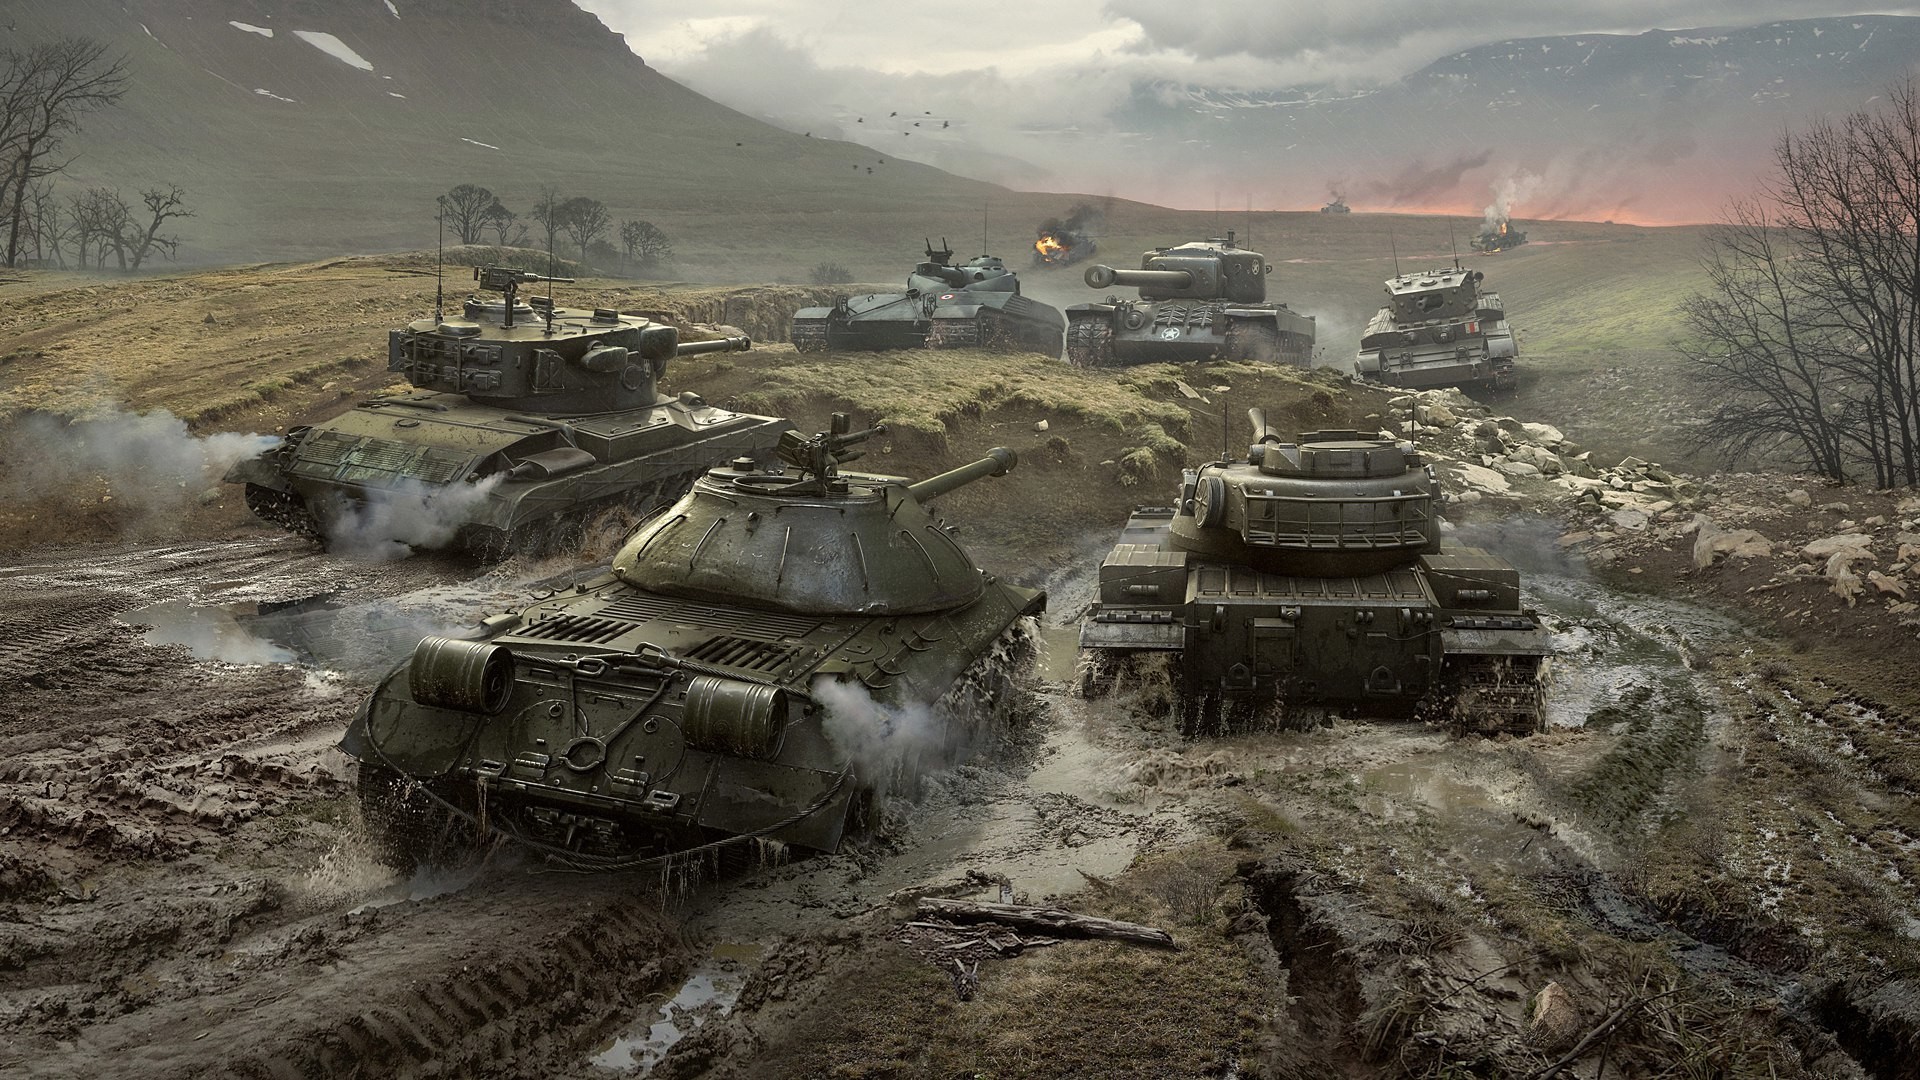 General 1920x1080 World of Tanks video games IS-3 PC gaming tank military vehicle video game art